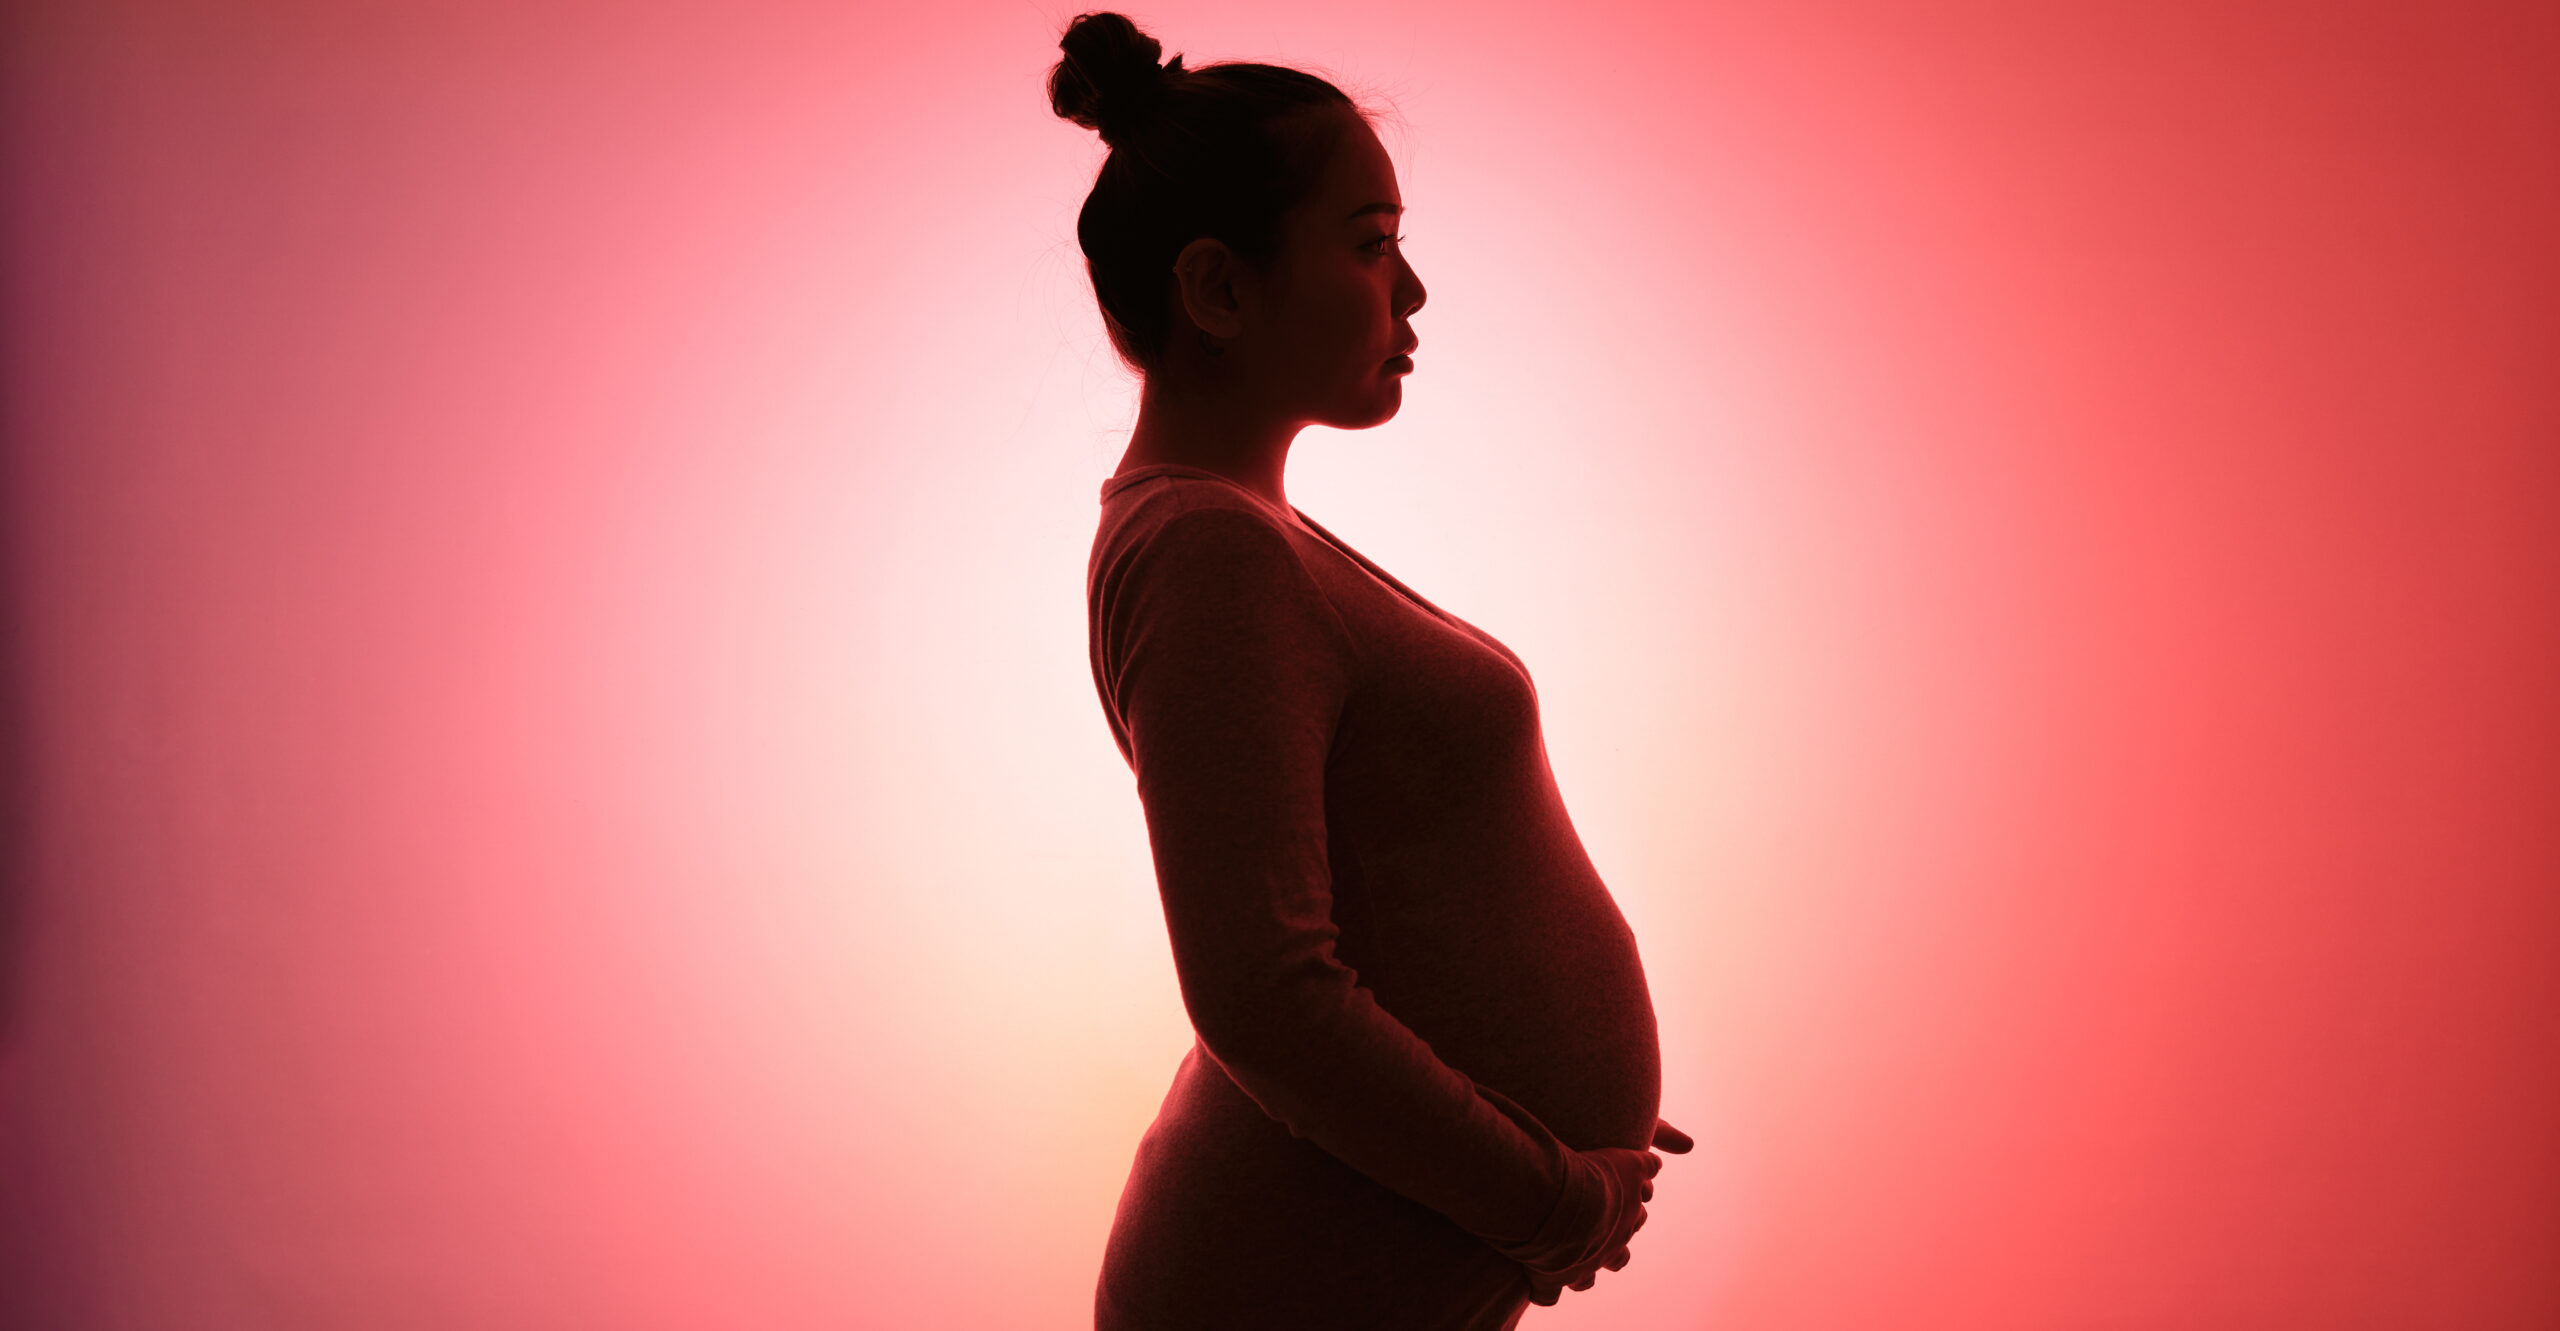 CDC Exaggerated Maternal Death Rates, Study Finds